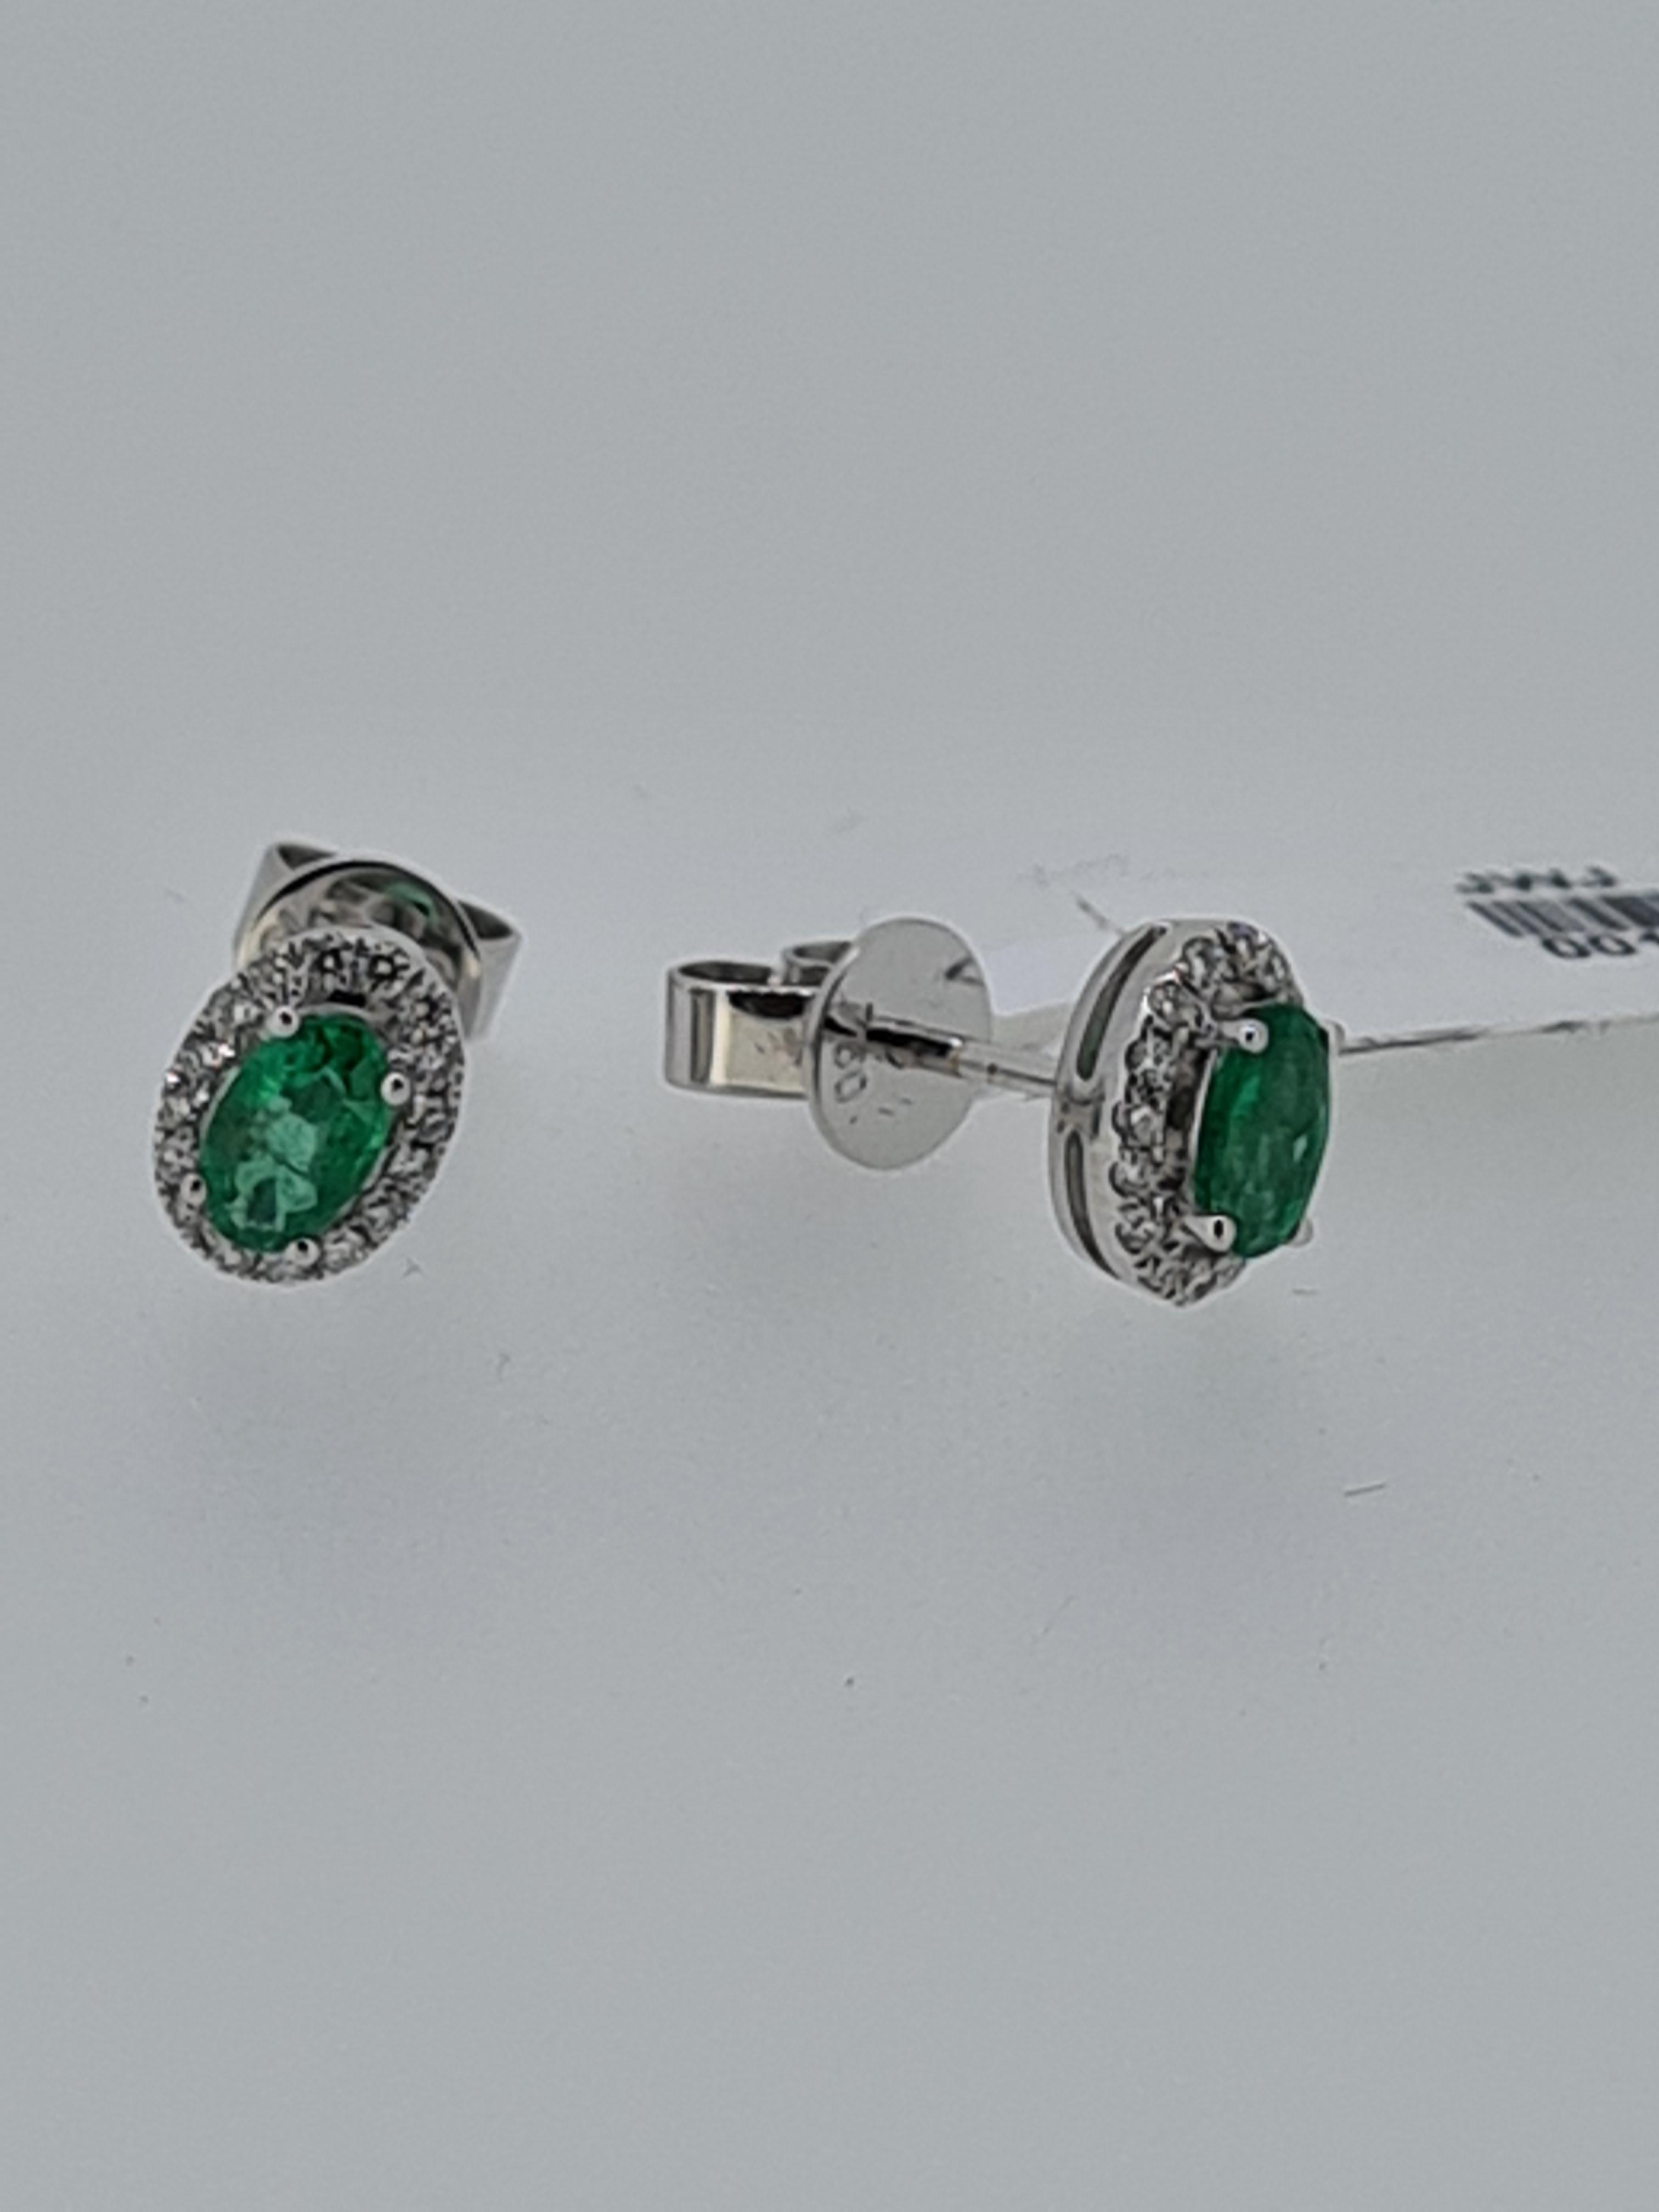 18ct white gold emerald and diamond stud earrings - Image 3 of 3